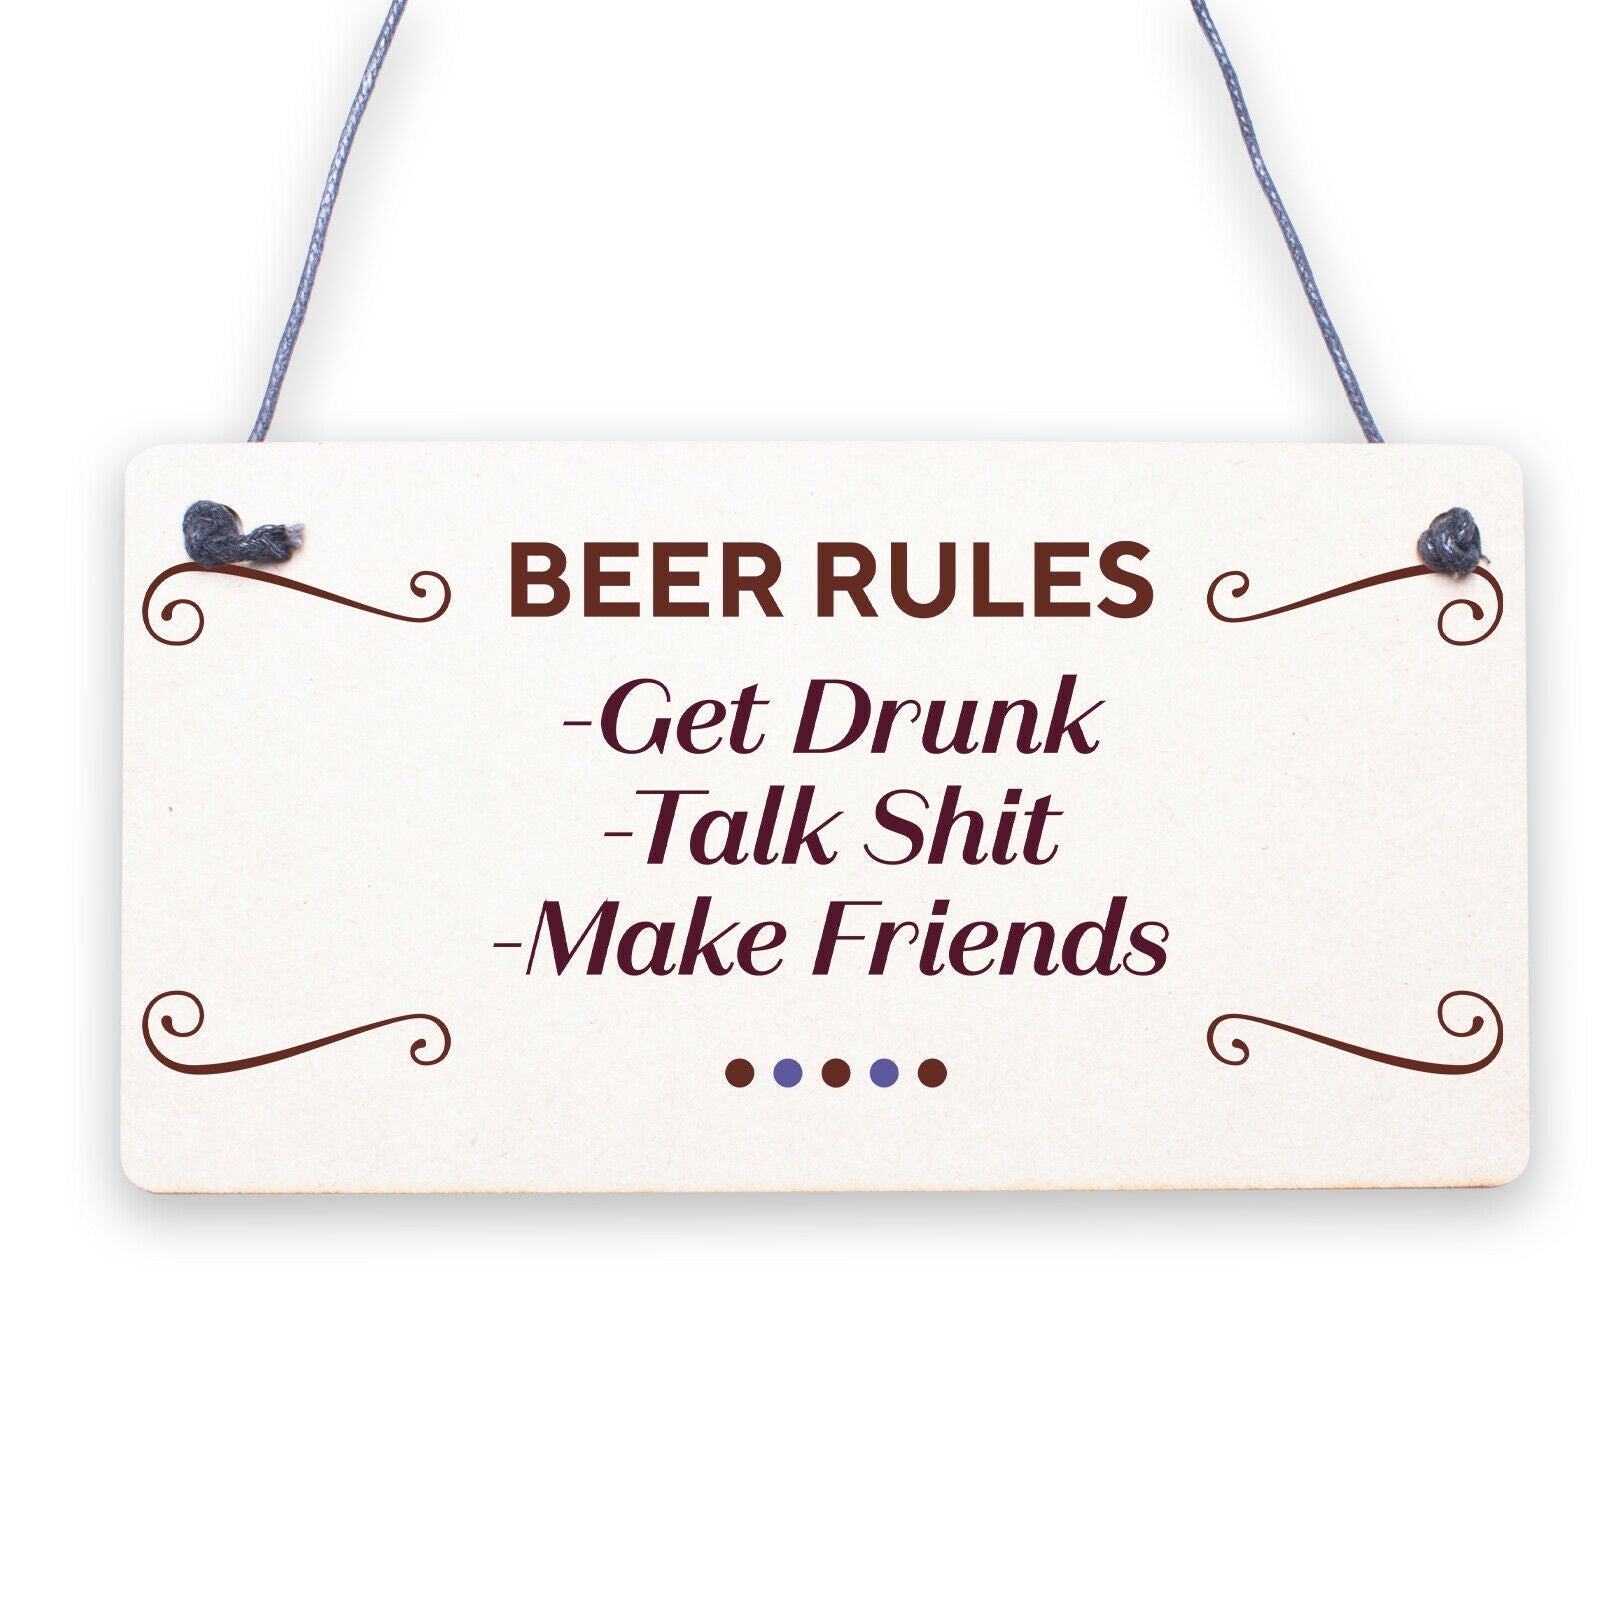 Beer Garden Rules Hanging Wall Signs Pub Garden Plaques Alcohol Friendship Gifts